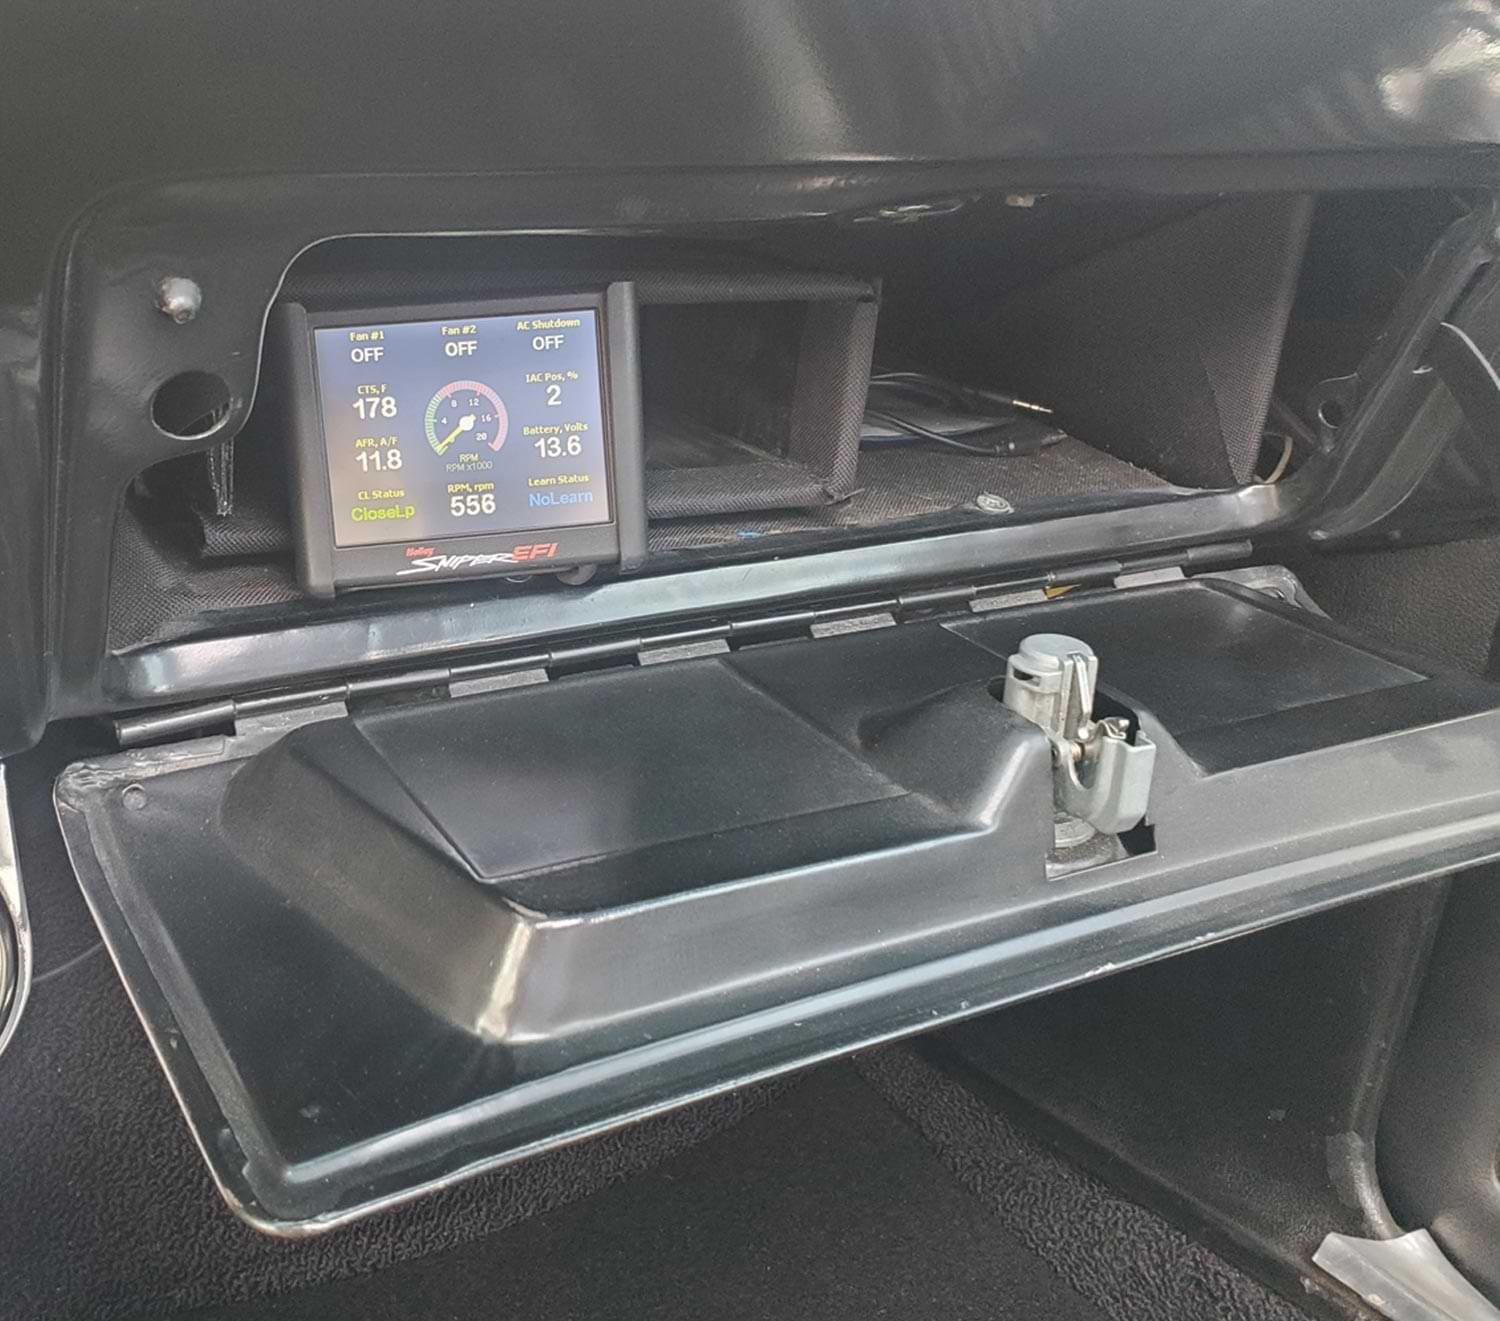 the 31/2-inch touch-screen, mounted on beneath the dashboard